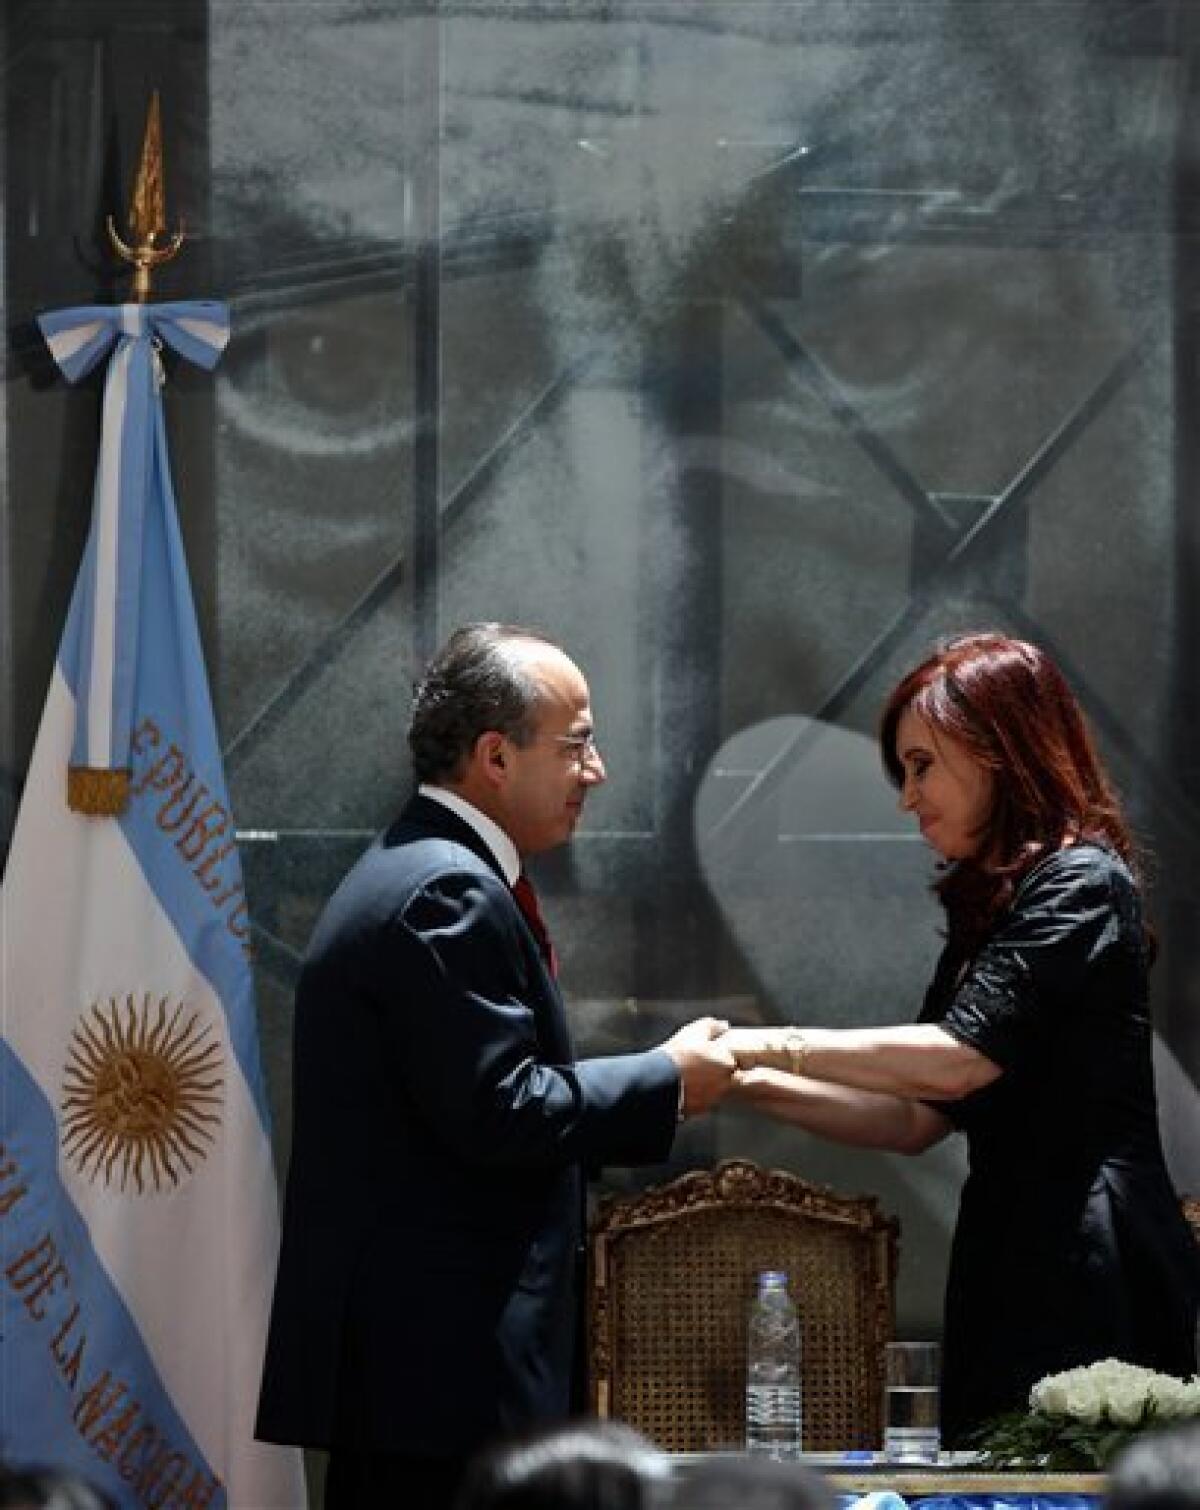 Mexico's President Felipe Calderon, left, and Argentina's President Cristina Fernandez talk back dropped by a photograph of Mexican artist David Alfaro Siqueiros, after inaugurating a mural painted by Siqueiros at the government house in Buenos Aires, Argentina, Friday, Dec. 3, 2010. The mural entitled "Ejercicio Plastico", has been placed at the future Museum of Political Arts, a former underground customs facility next to the government house. (AP Photo/Ivan Fernandez)